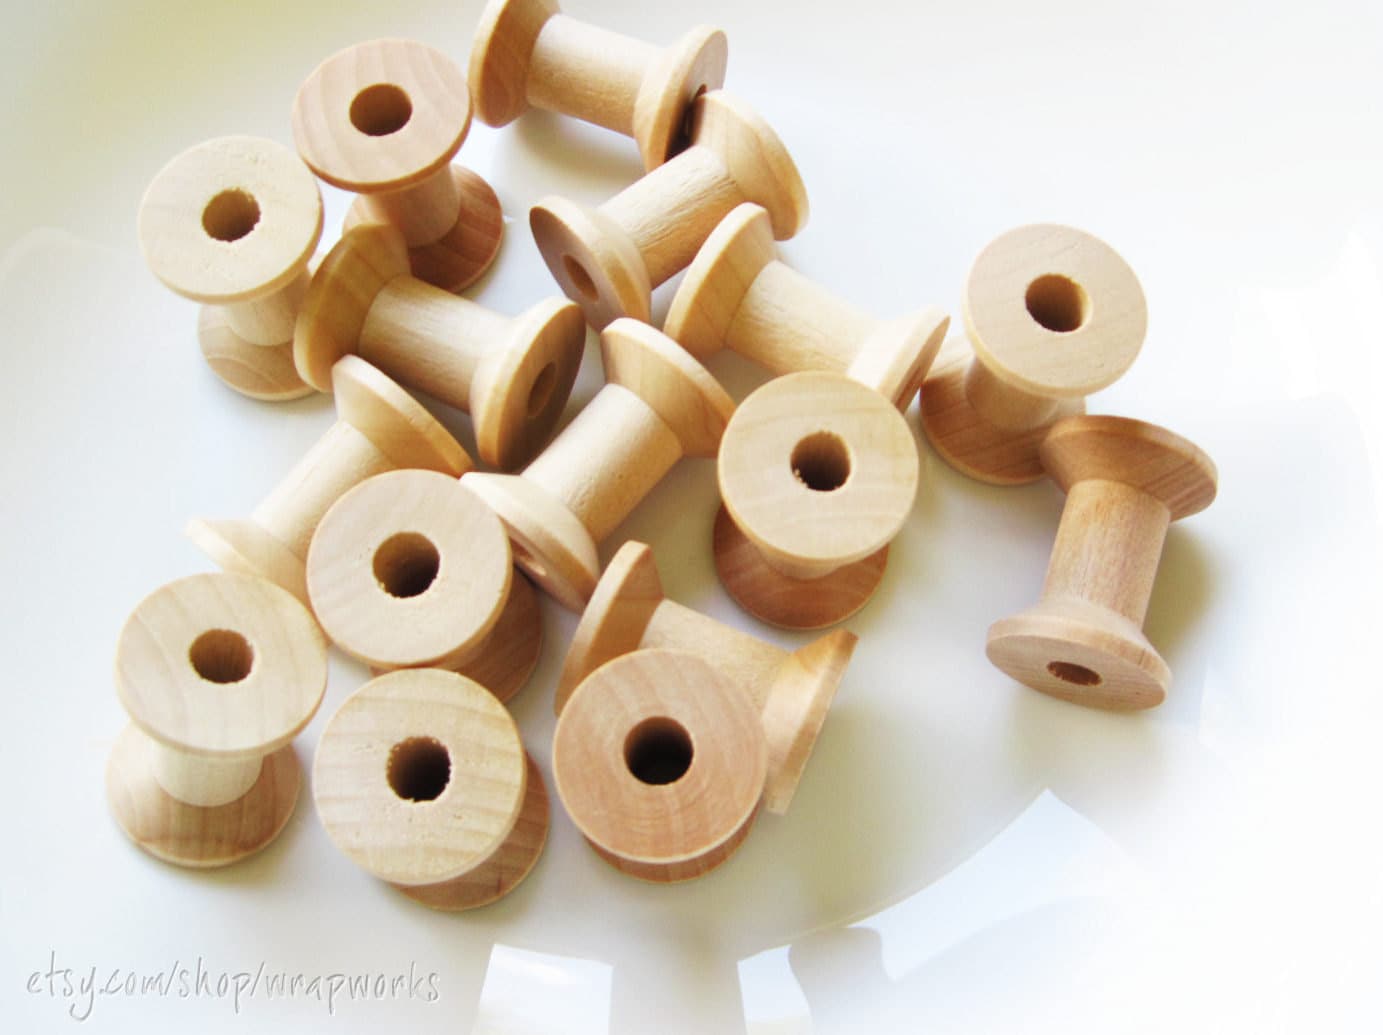 100 Wooden Spools 1 1/8 x 7/8 inch , Wood Bobbin for Crafting, Twine,  Thread, Sewing or Decor